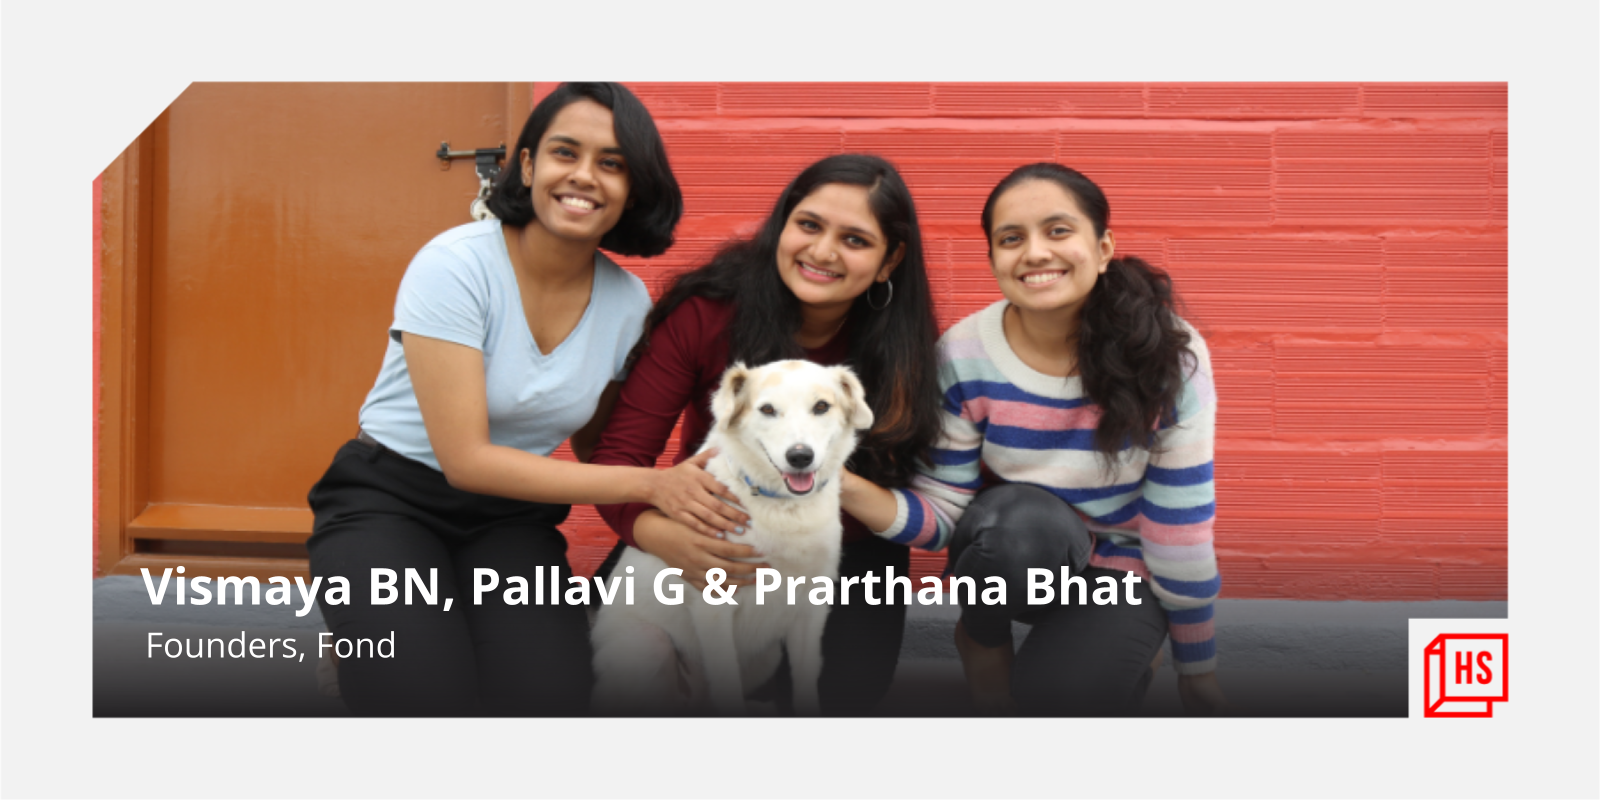 These engineering students have developed smart wearables to make pet parenting easy

